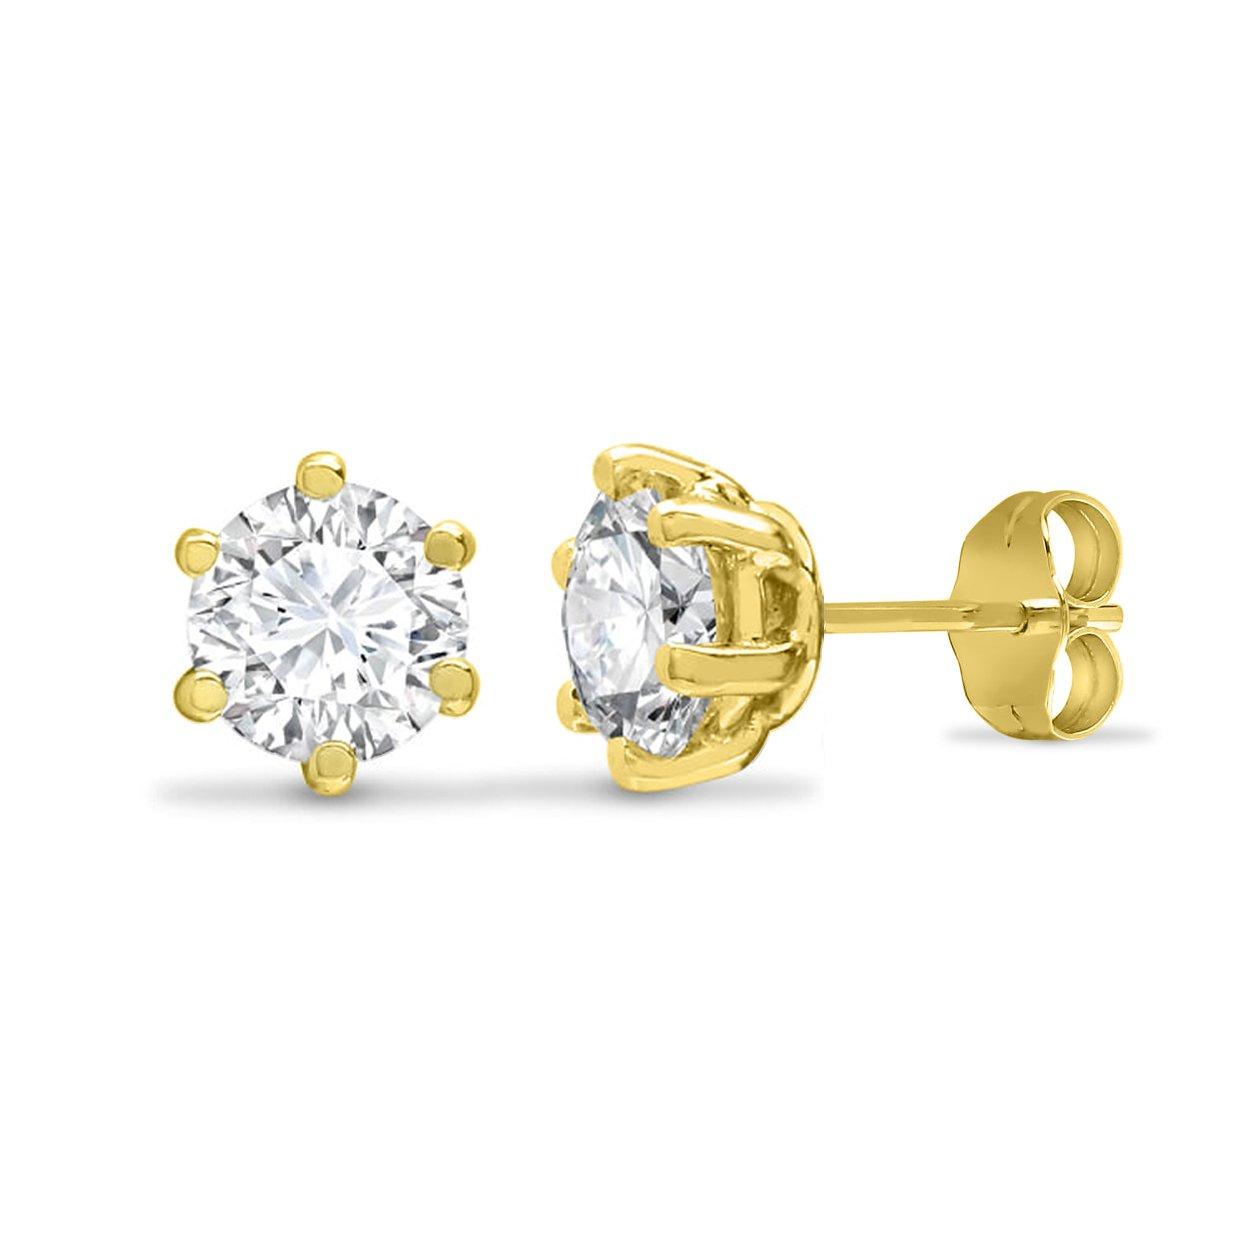 9ct Gold  CZ 6 Claw Solitaire Stud Earrings, 5mm - JES127